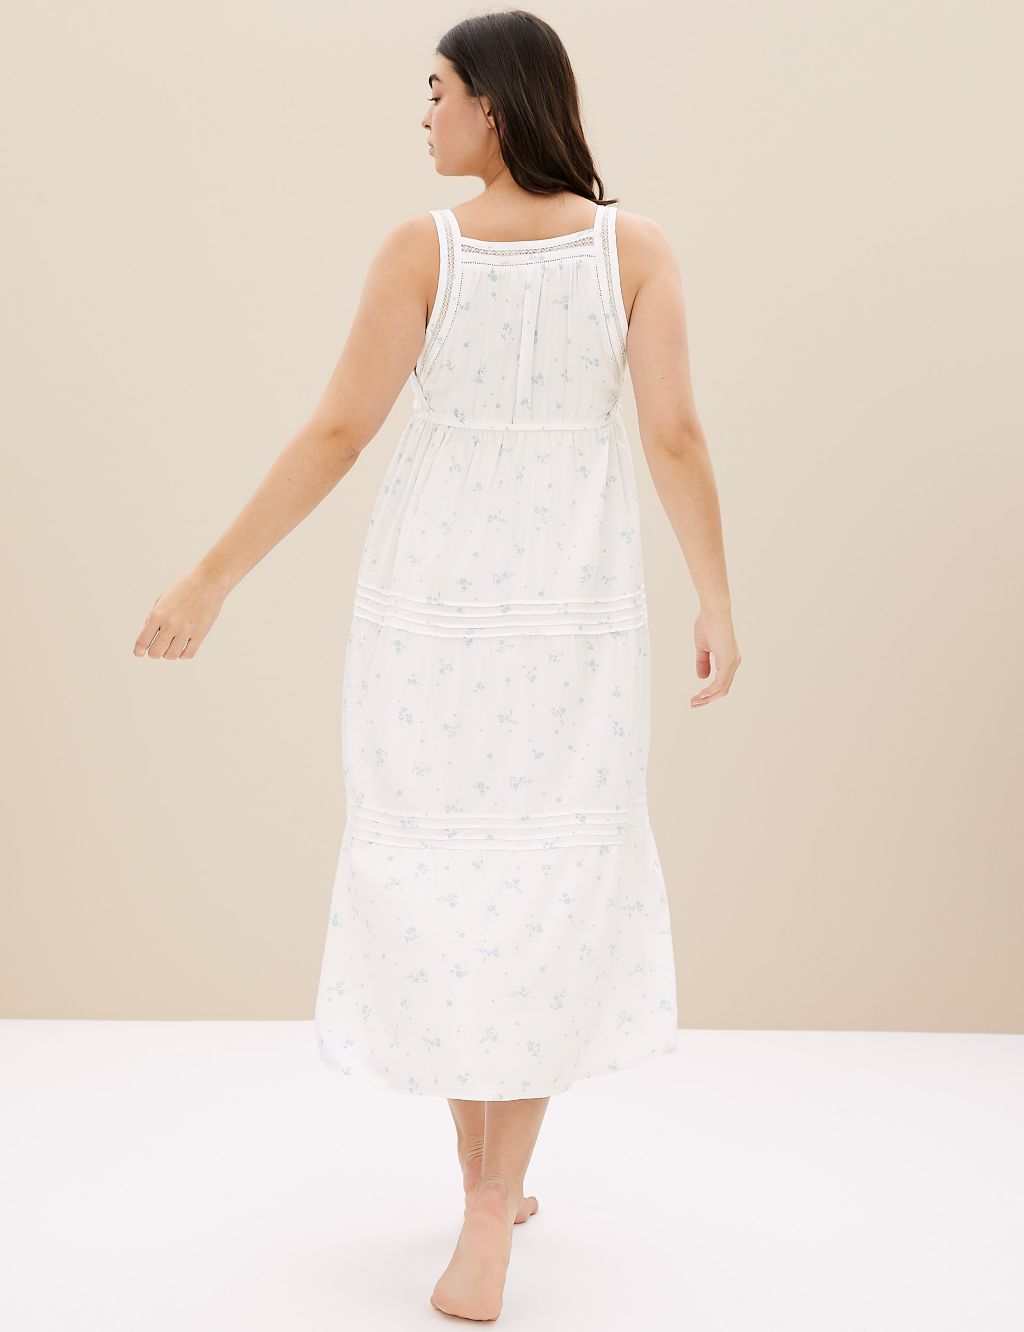 Floral Strappy Long Nightdress image 3